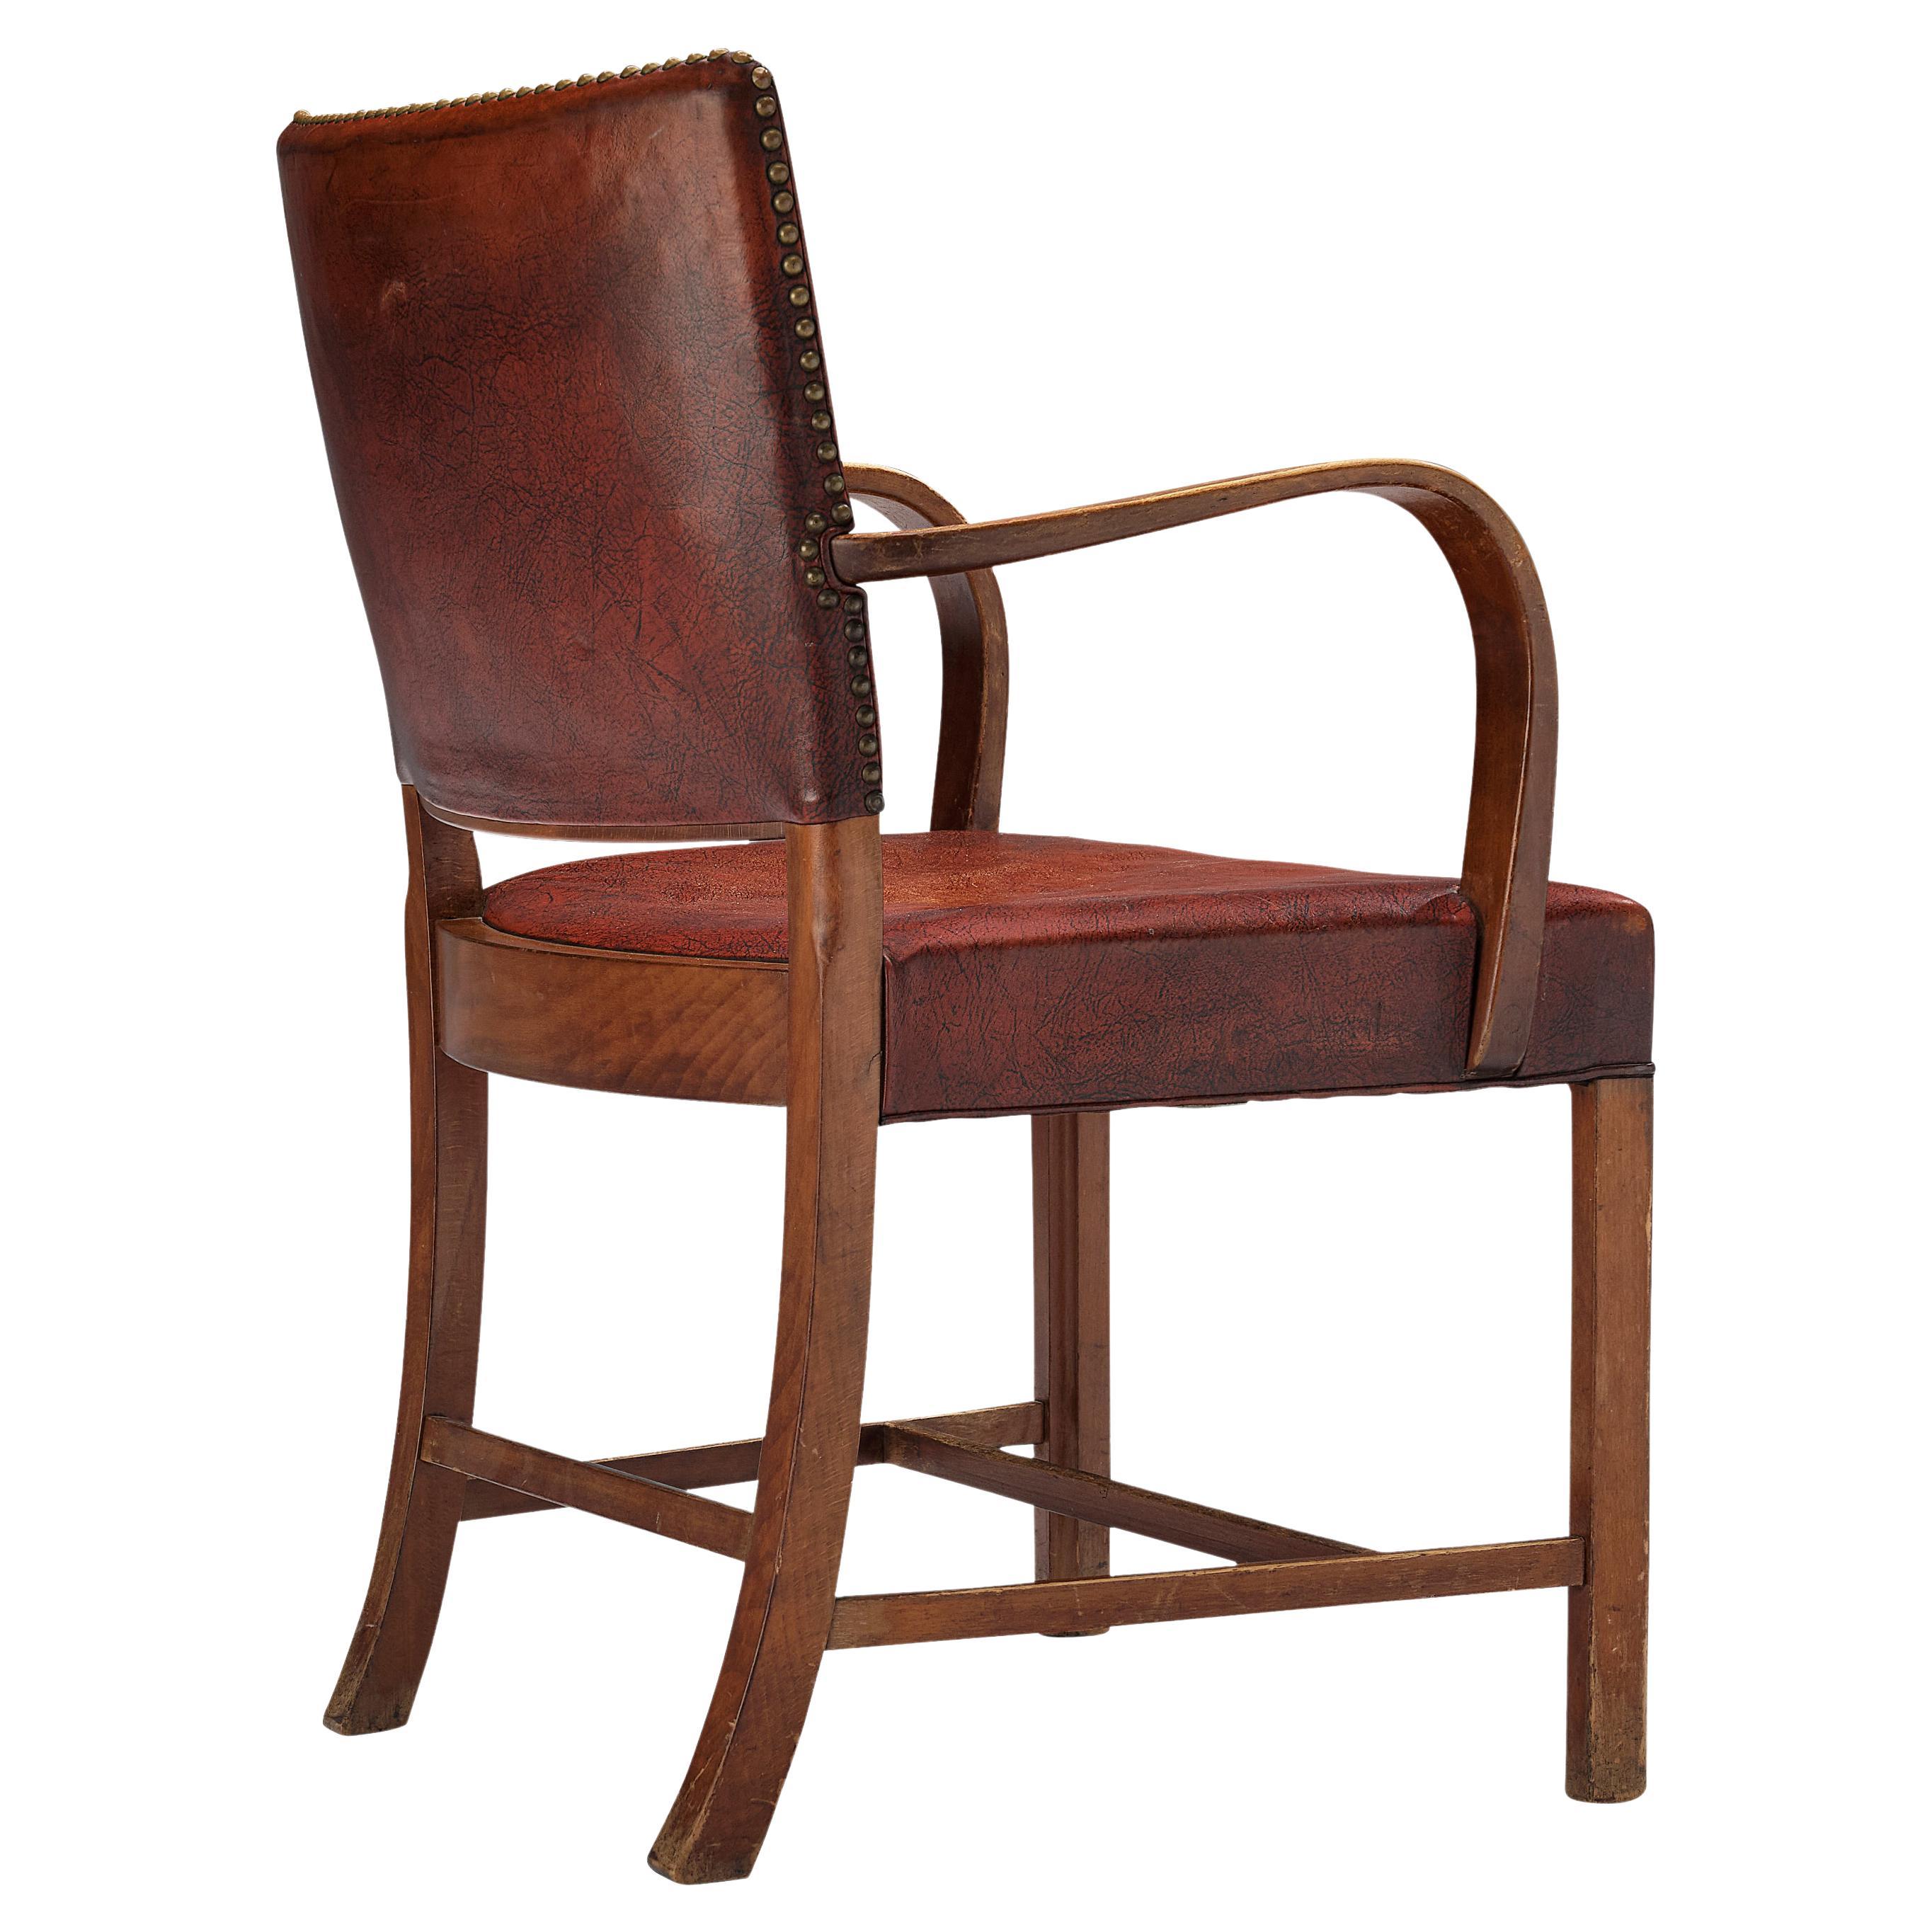 Early Fritz Hansen Armchair in Original Patinated Leather